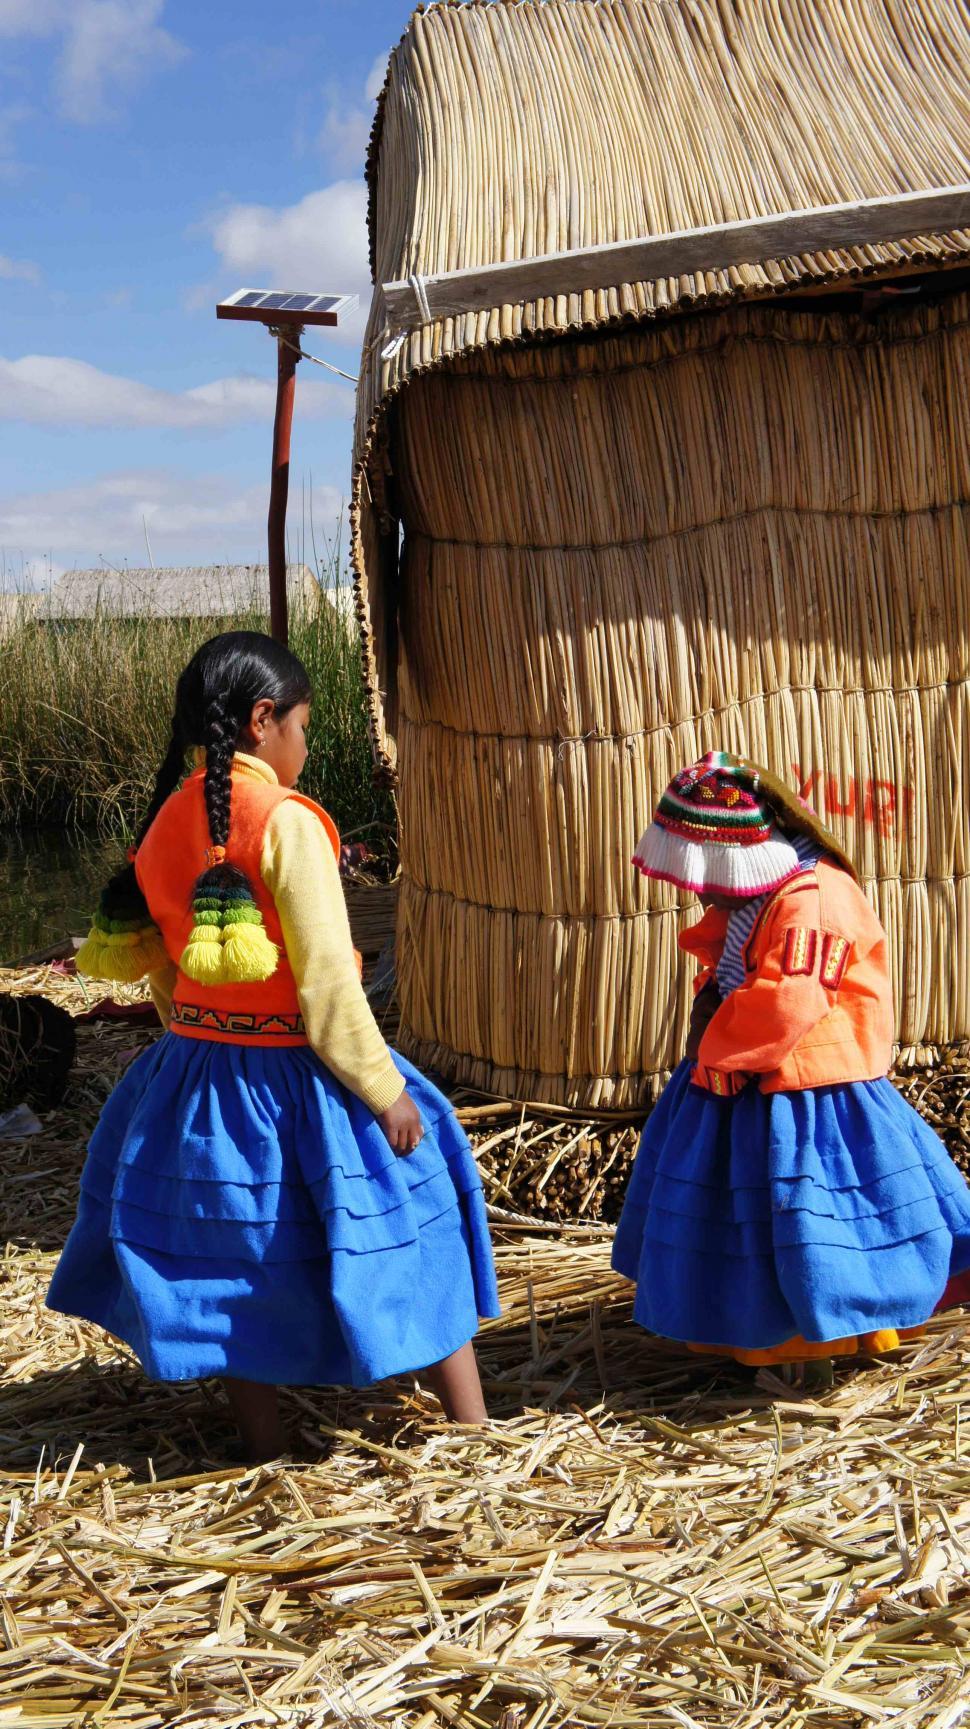 Free Image of Lake Titicaca Buildings and Families 